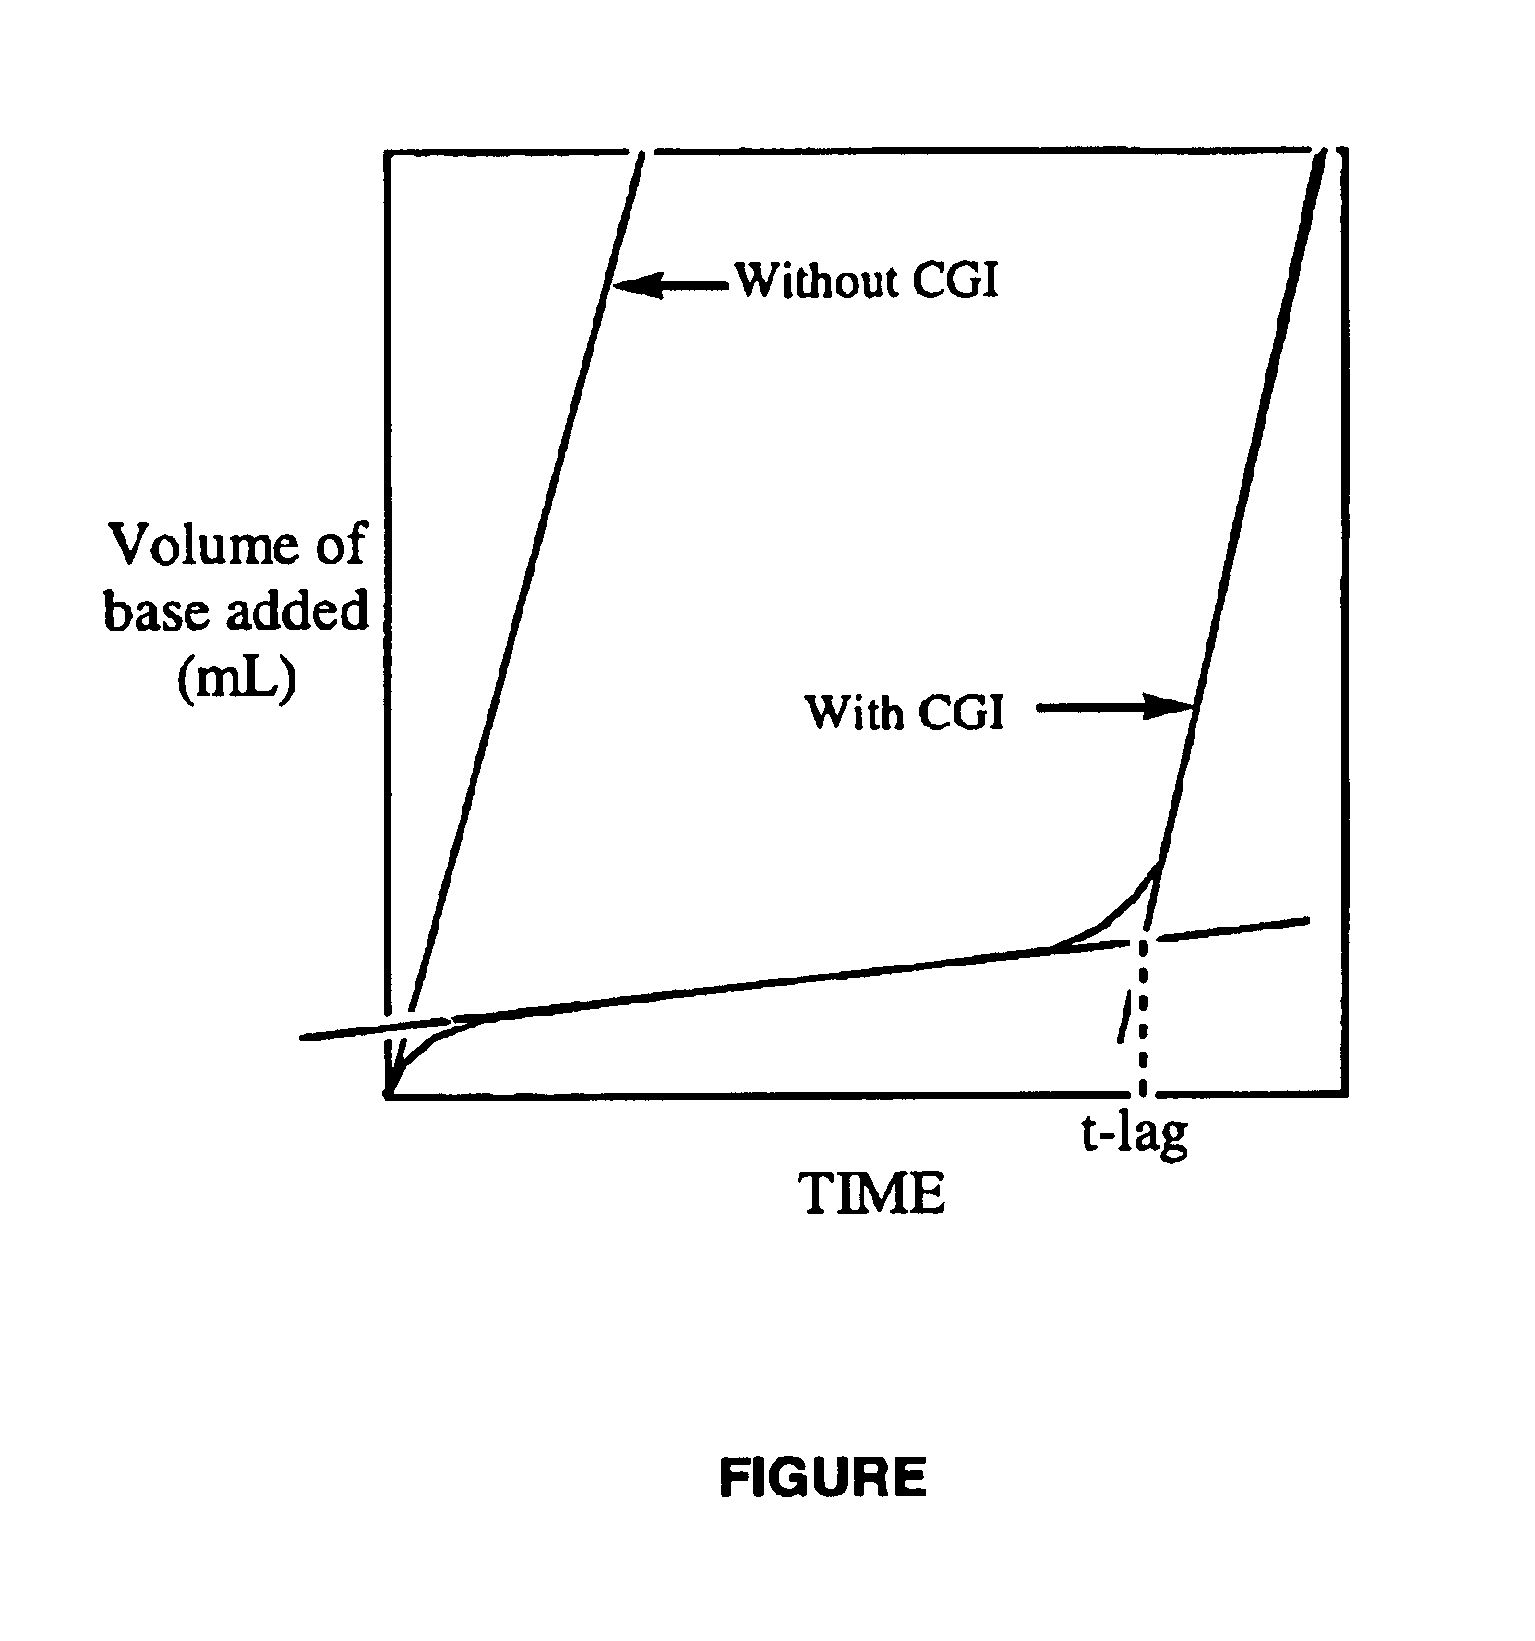 Rinse-added fabric treatment composition, kit containing such, and method of use therefor